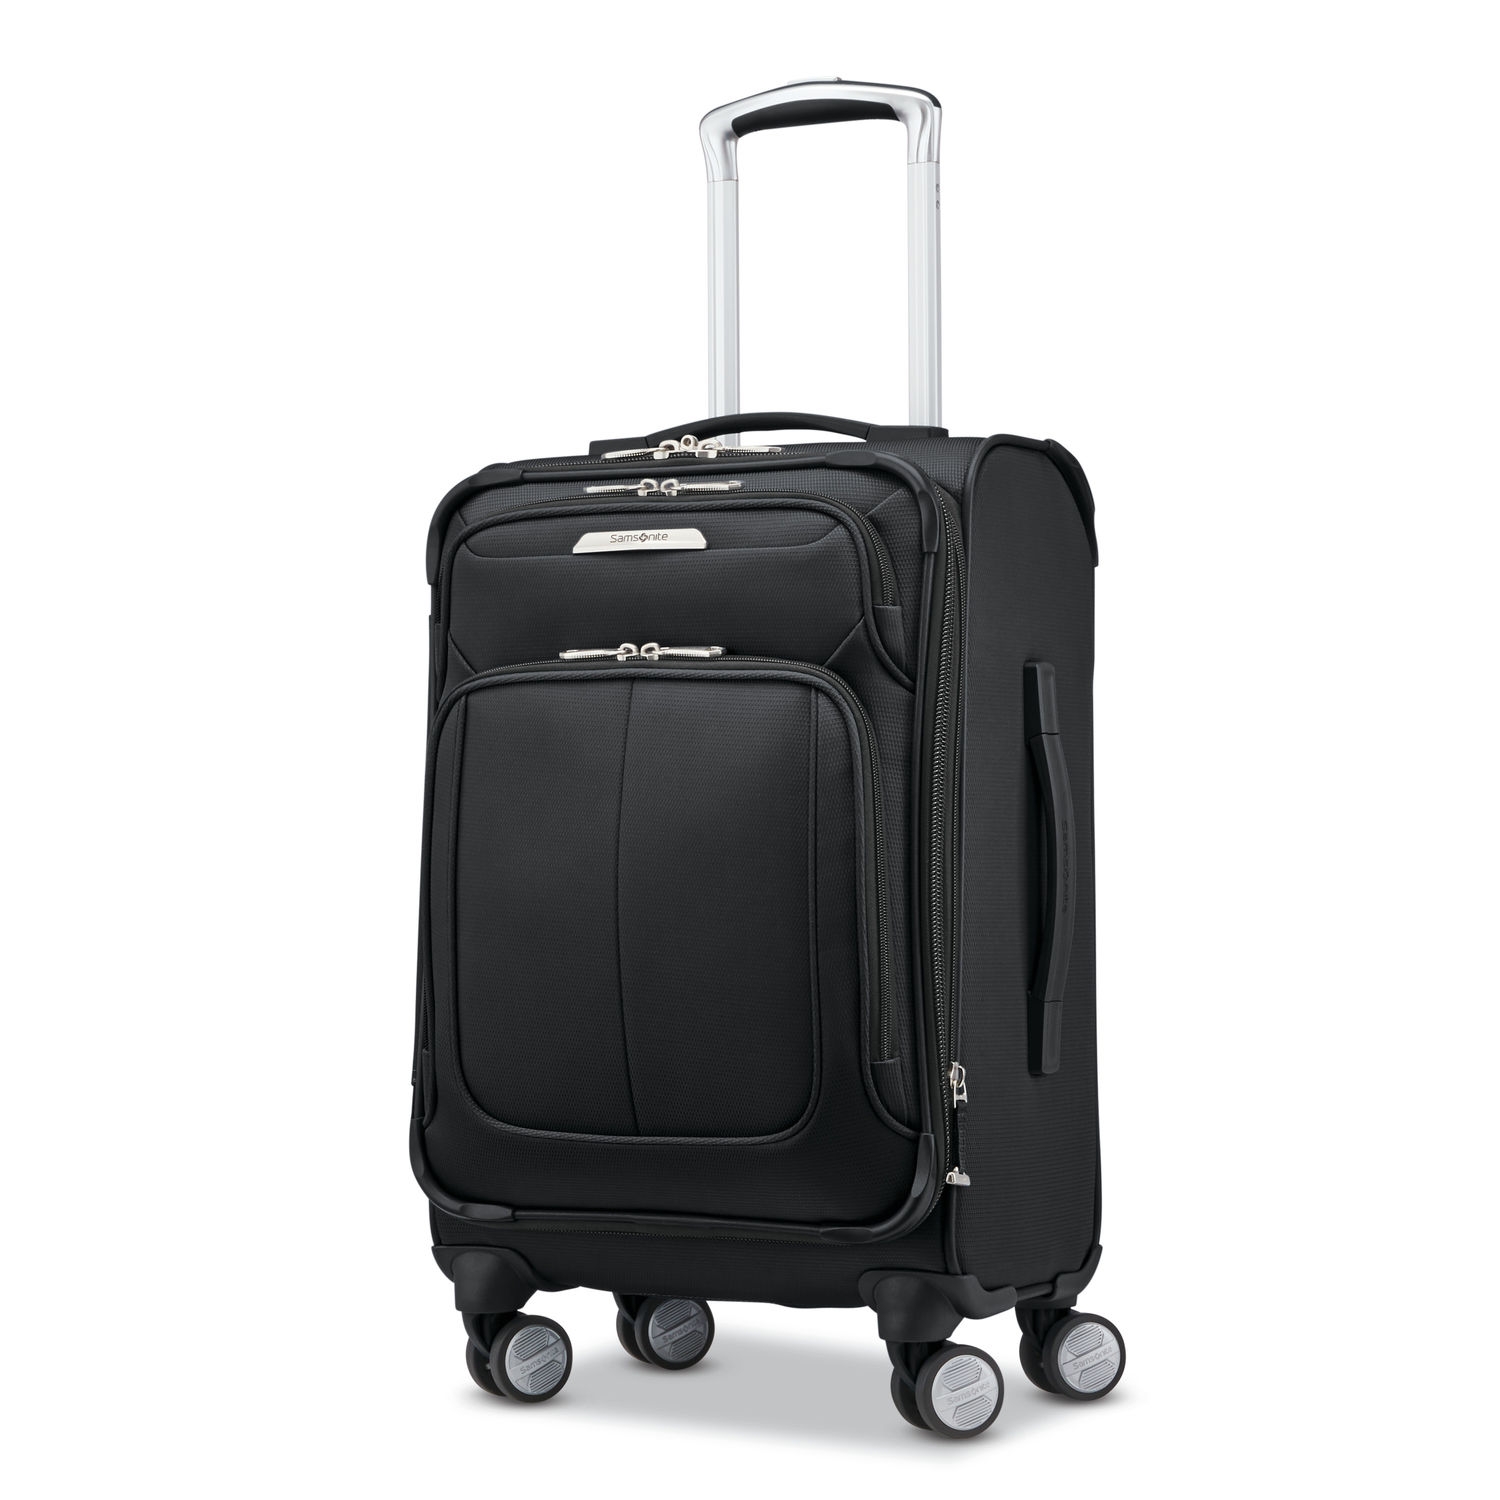 Samsonite SoLyte DLX Carry-On Expandable Spinner - Midnight Black - Irv’s Luggage